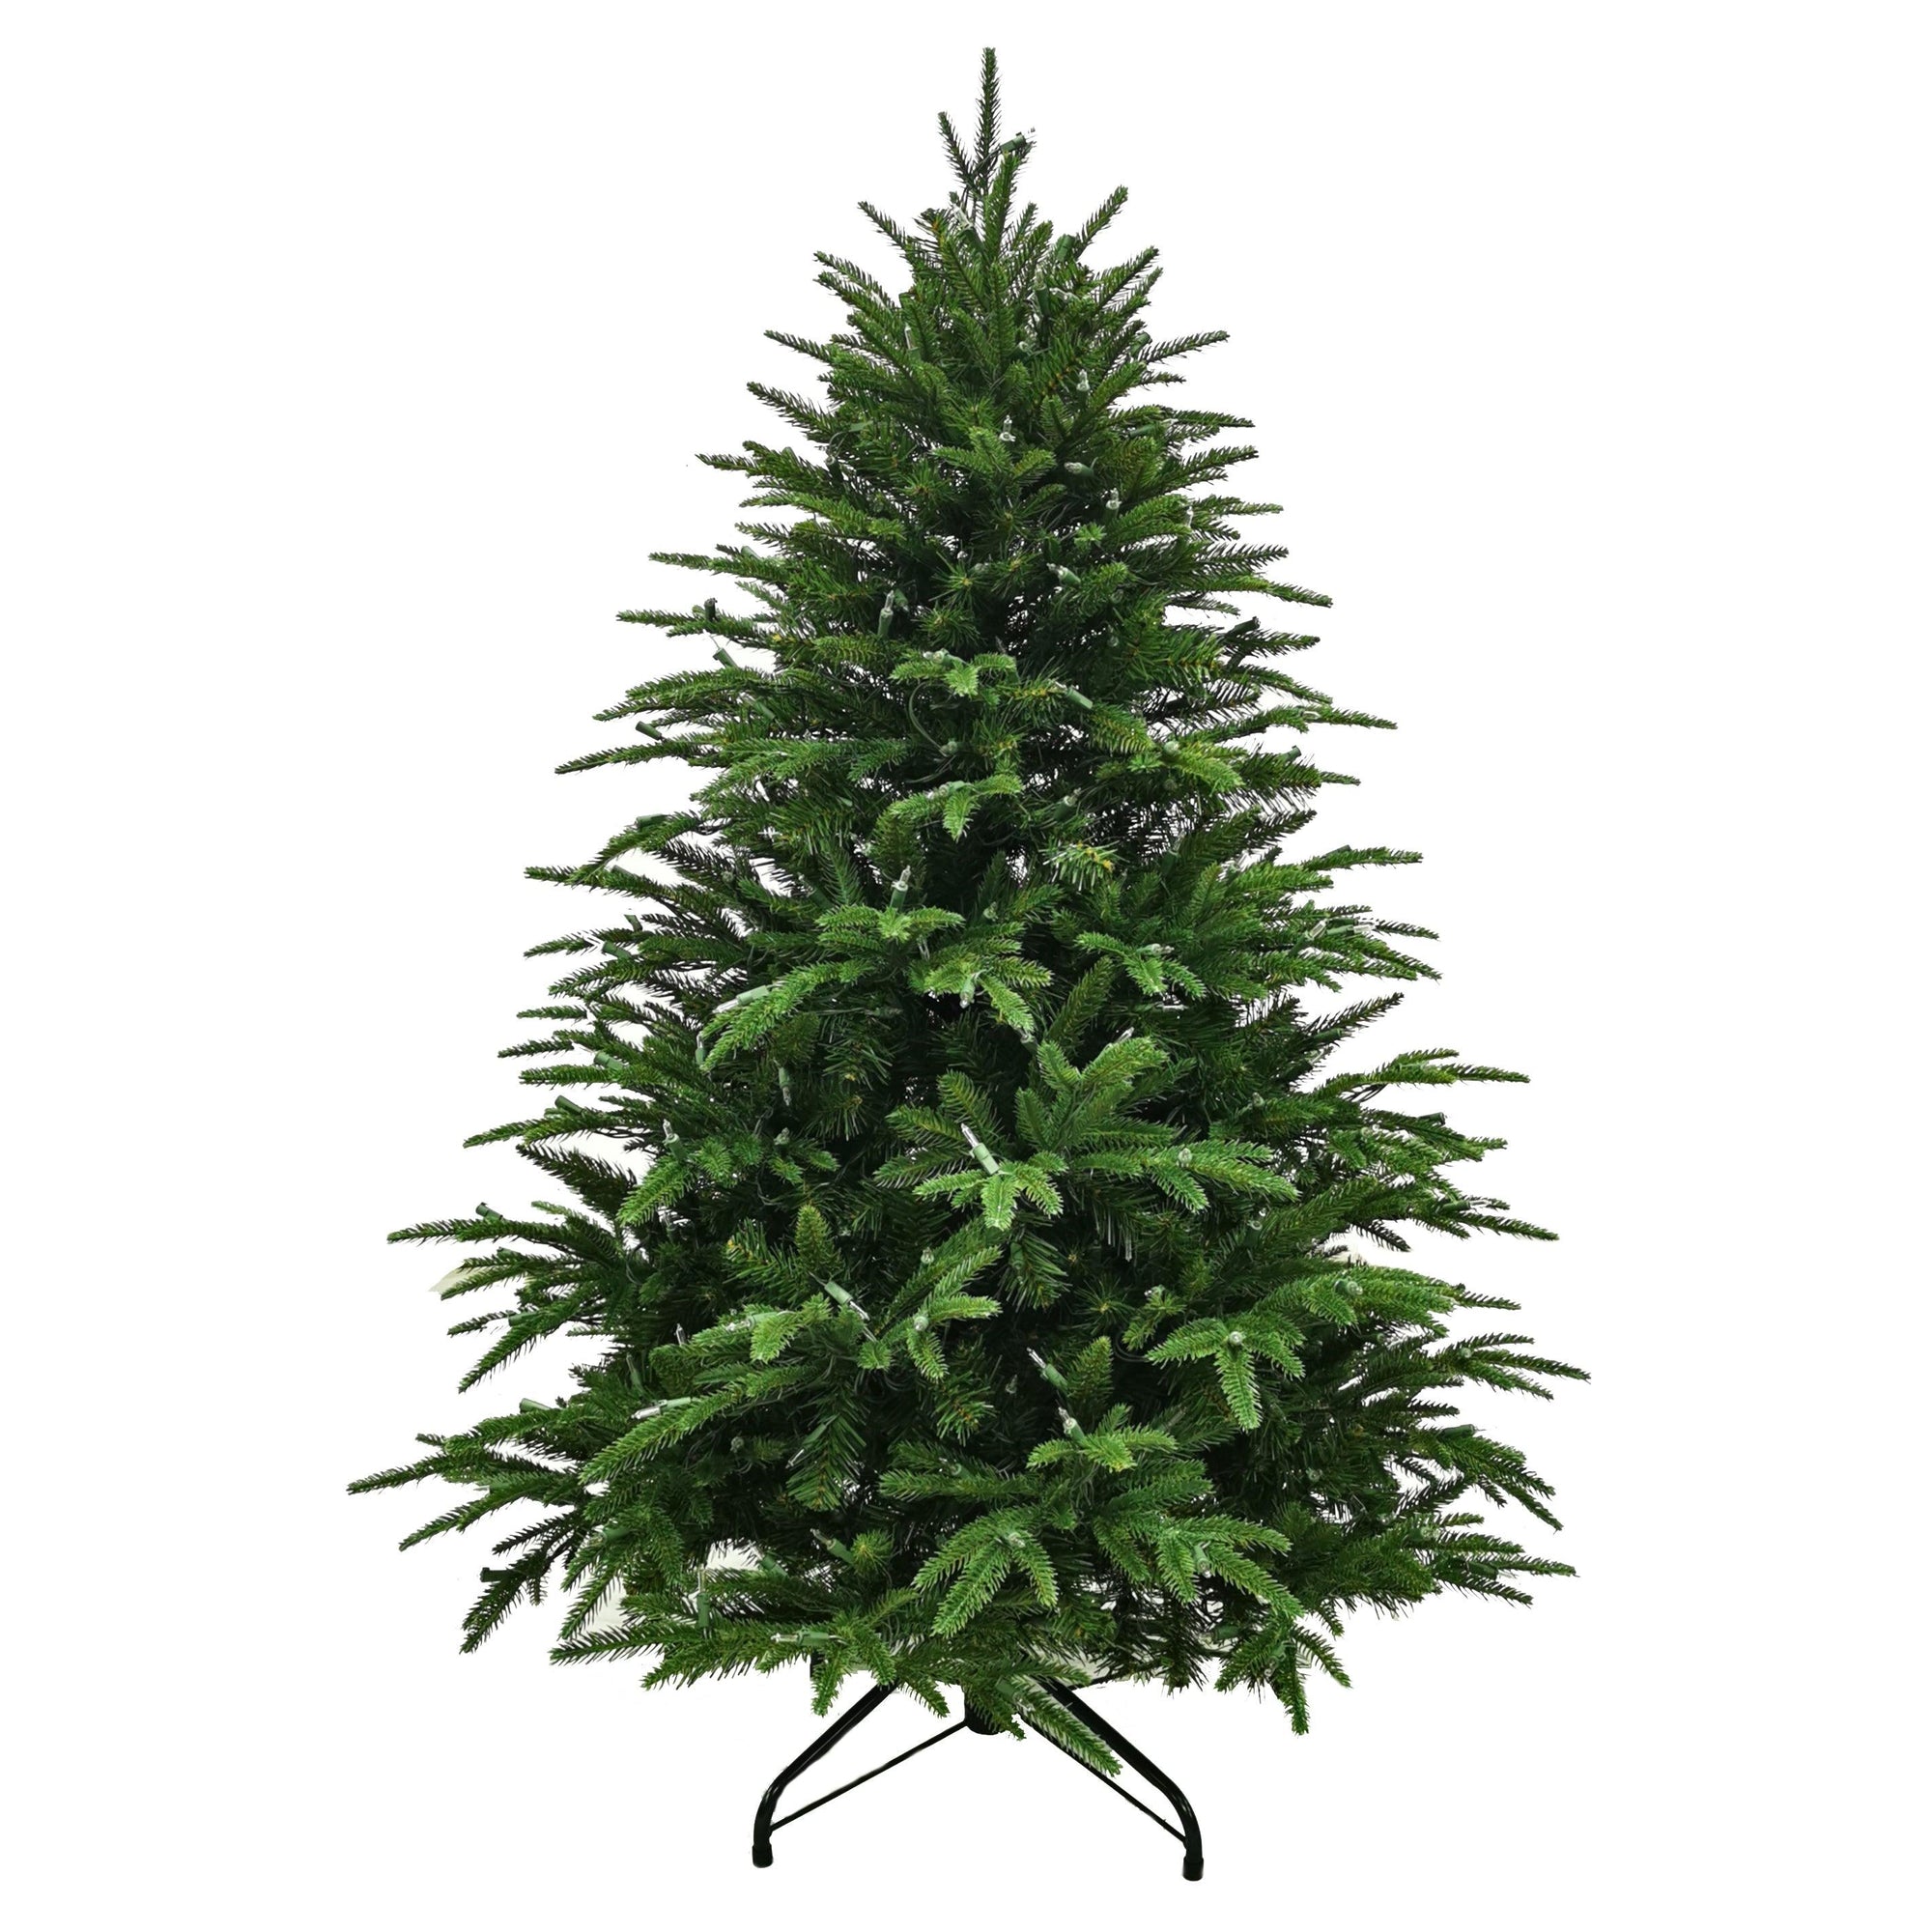 Embrace the holiday spirit with the 4.5' Greenland Everlasting Pre-Lit Christmas Tree. This charming tree boasts a height of 4.5 feet, making it a perfect addition to your festive décor. With its pre-lit design, it's adorned with built-in lights that eliminate the hassle of stringing lights yourself. This delightful Christmas tree brings warmth and cheer to your home, creating a cozy ambiance for your celebrations. 